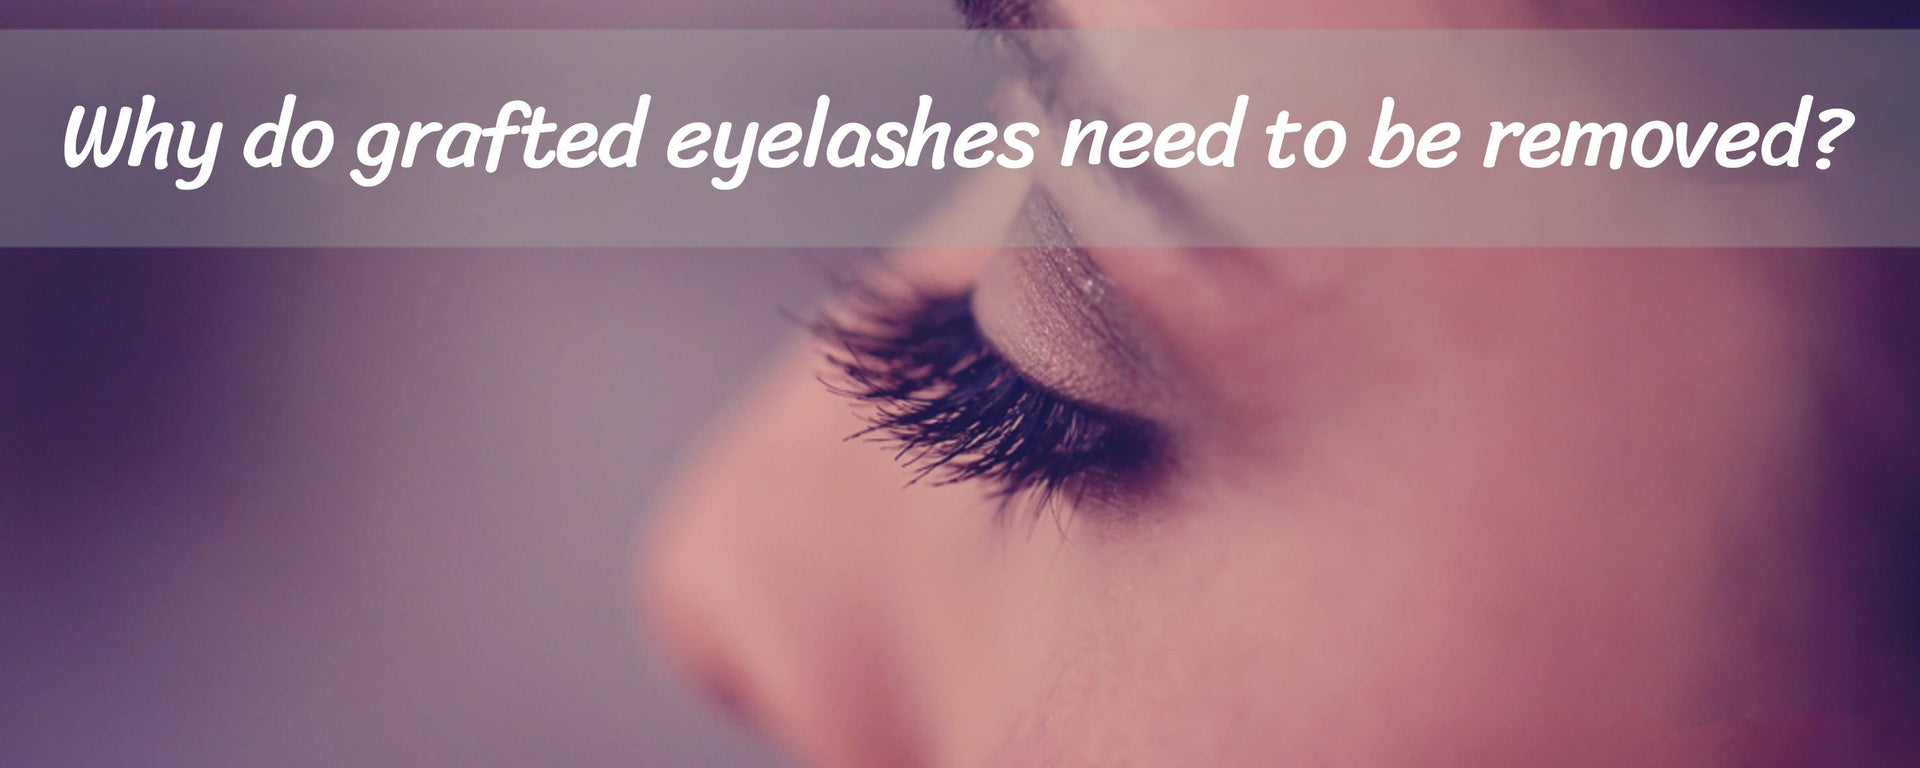 Why Do Grafted Eyelashes Need To Be Removed?